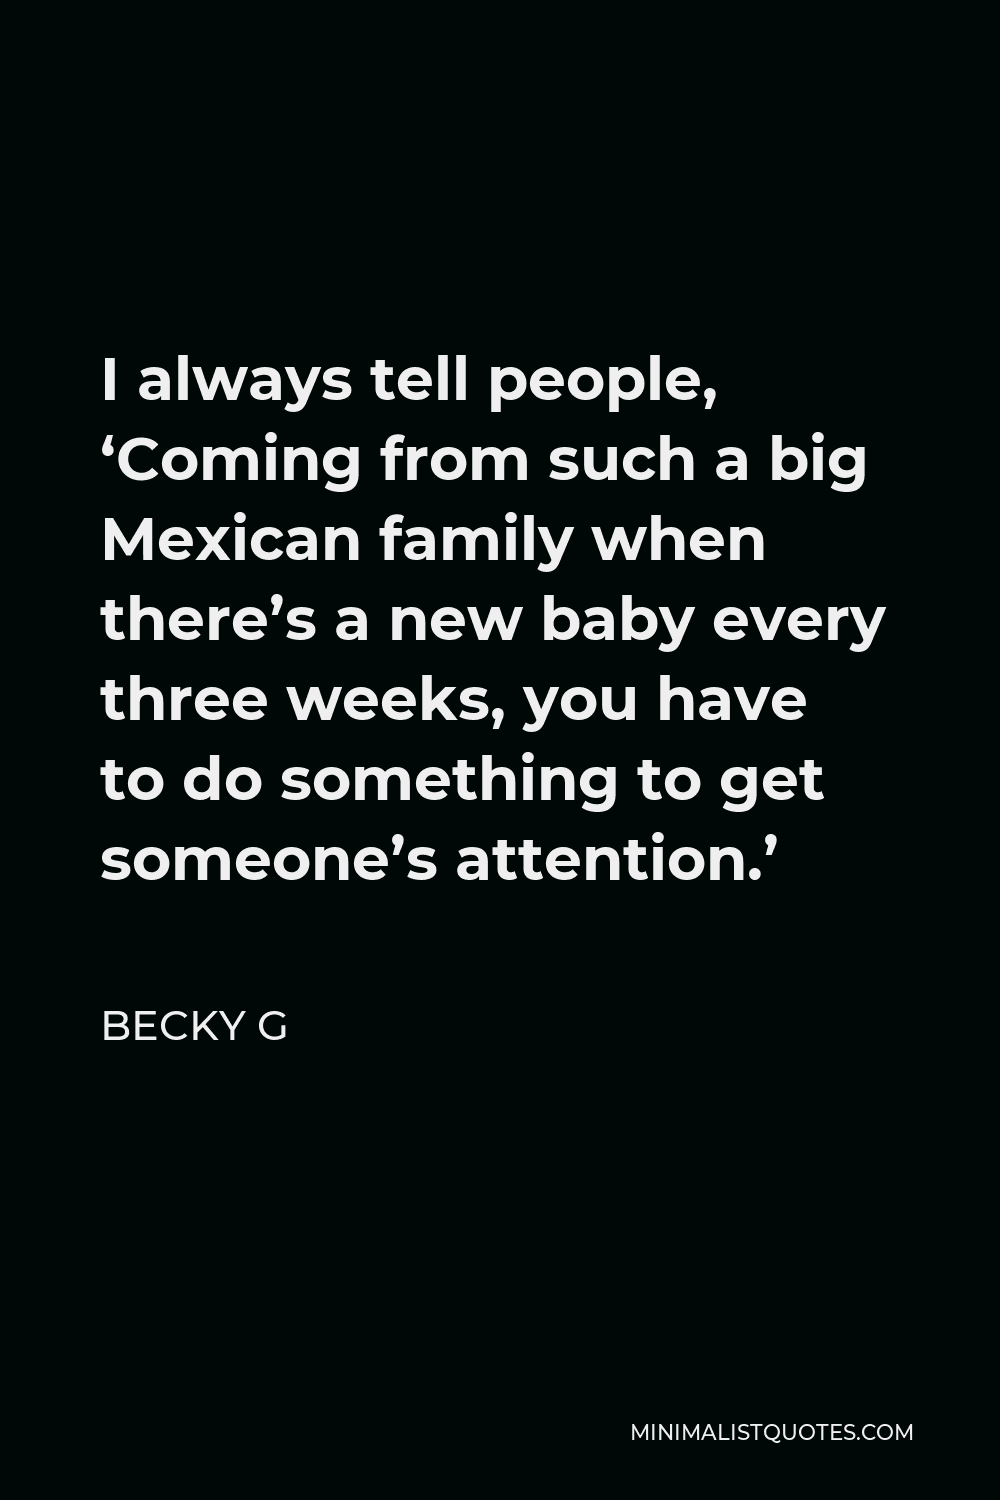 Becky G Quote - I always tell people, ‘Coming from such a big Mexican family when there’s a new baby every three weeks, you have to do something to get someone’s attention.’